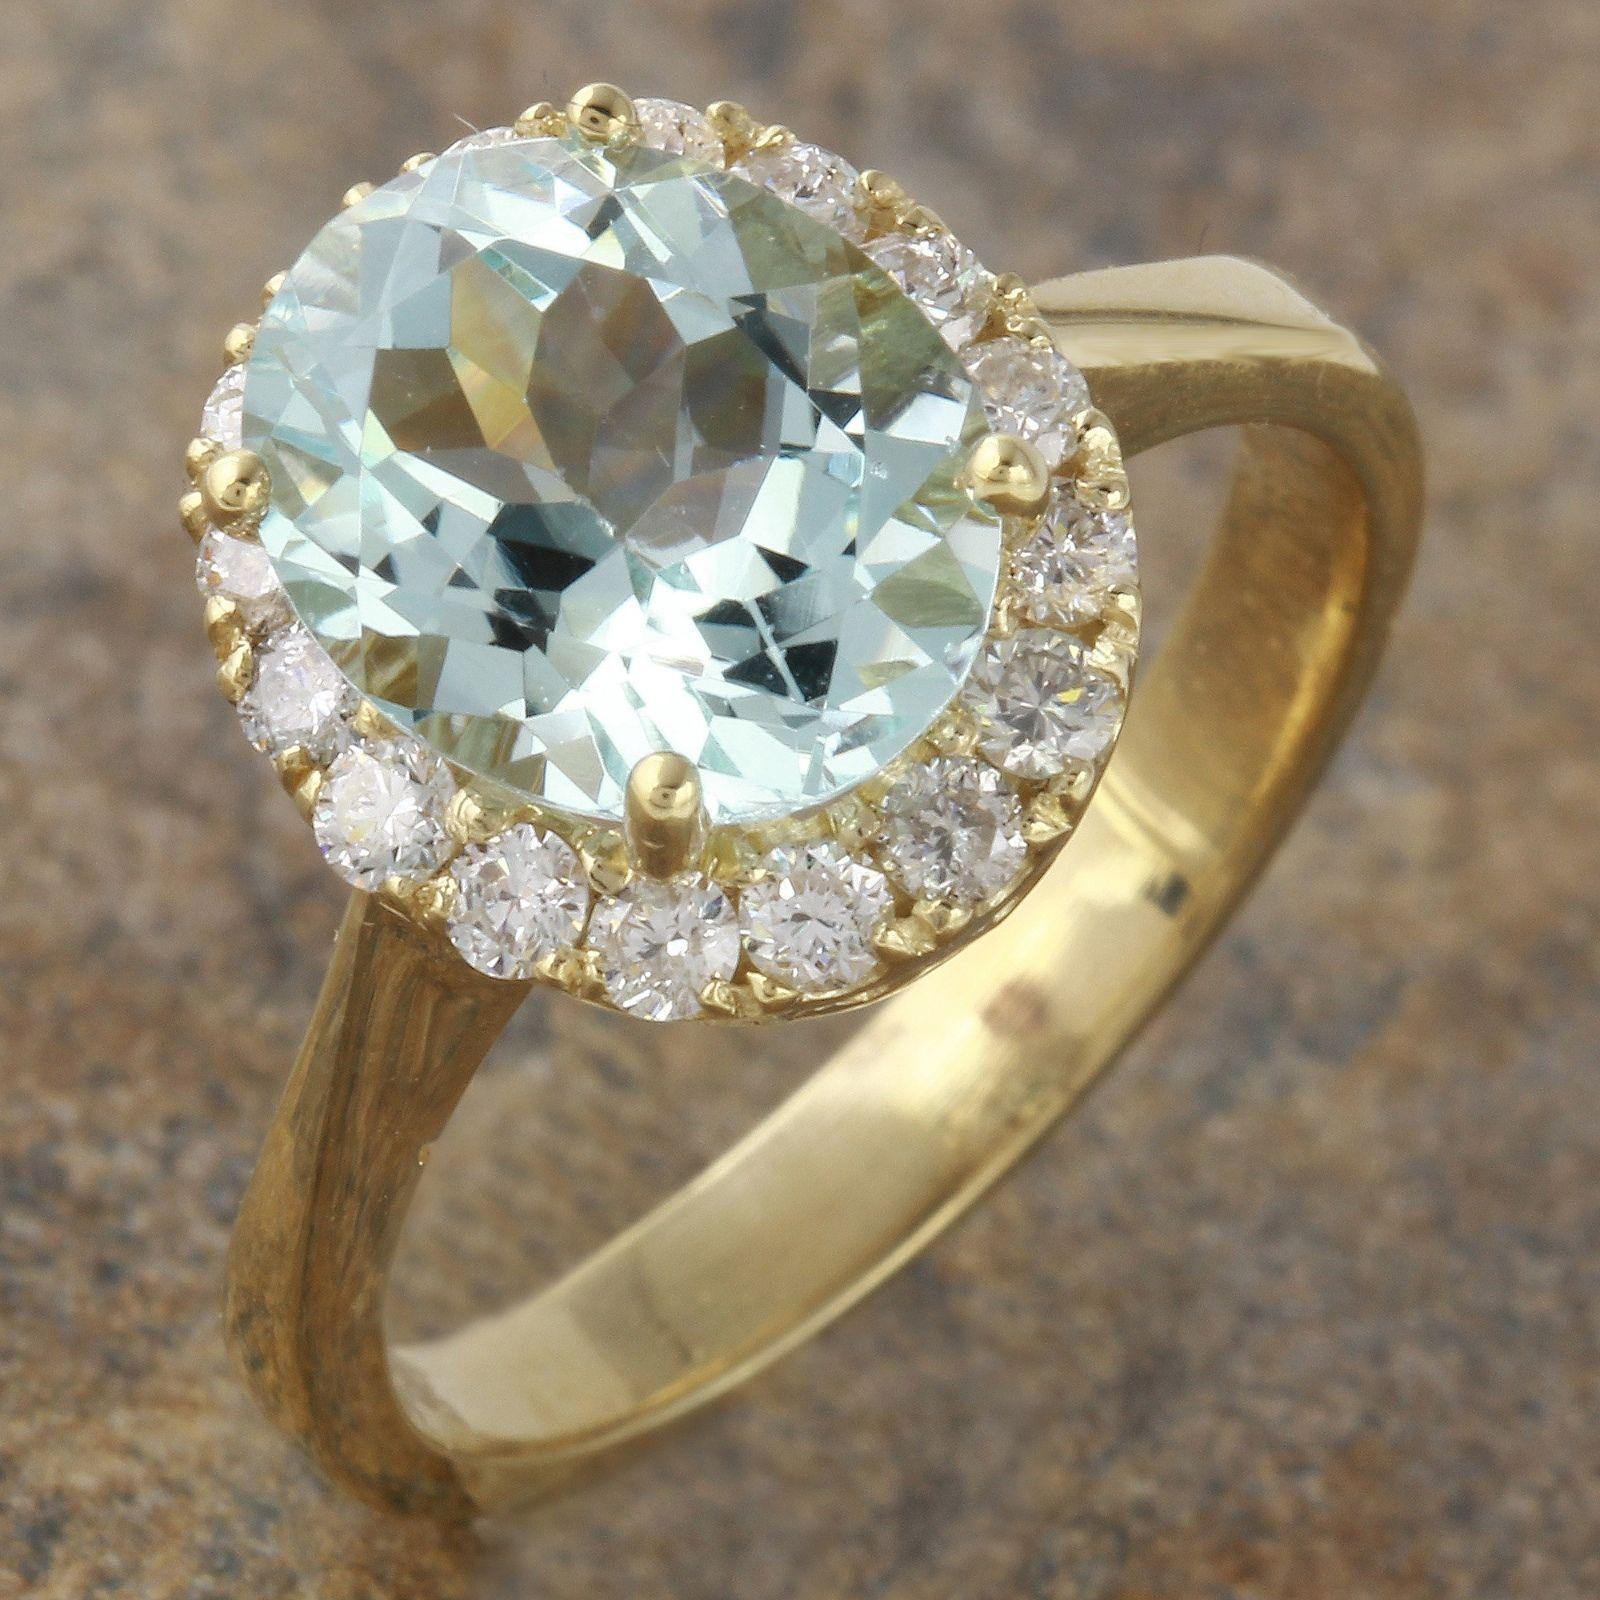 2.75 Carats Exquisite Natural Aquamarine and Diamond 14K Solid Yellow Gold Ring

Suggested Replacement Value: 5,600.00

Total Natural Aquamarine Weight is: 2.10 Carats (Heated)

Aquamarine Measures: 9.54 x 7.10mm

Natural Round Diamonds Weight: .65